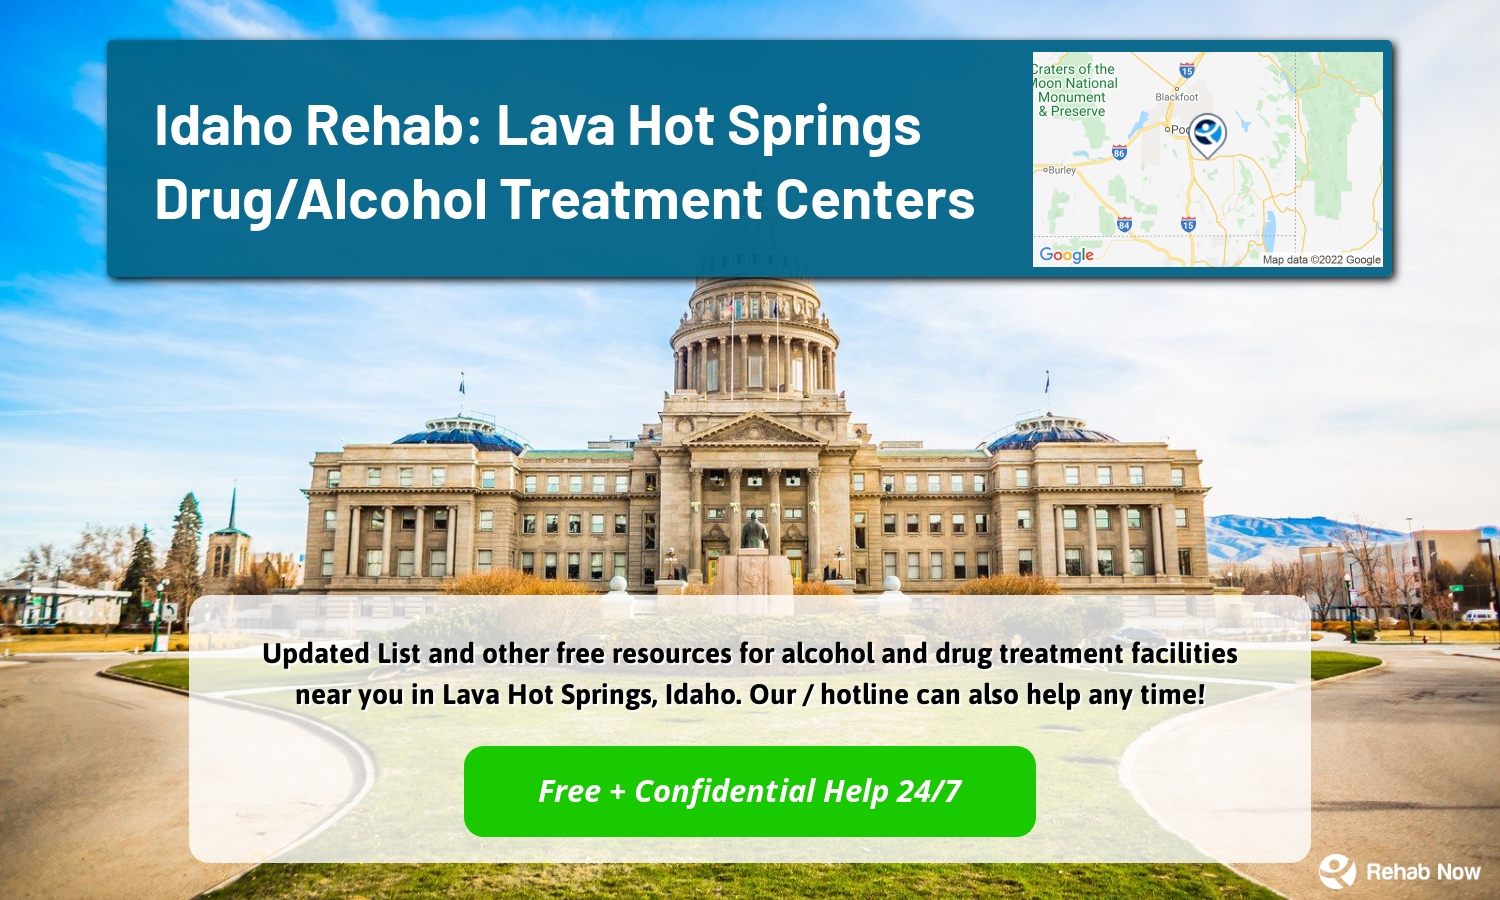  Updated List and other free resources for alcohol and drug treatment facilities near you in Lava Hot Springs, Idaho. Our / hotline can also help any time!